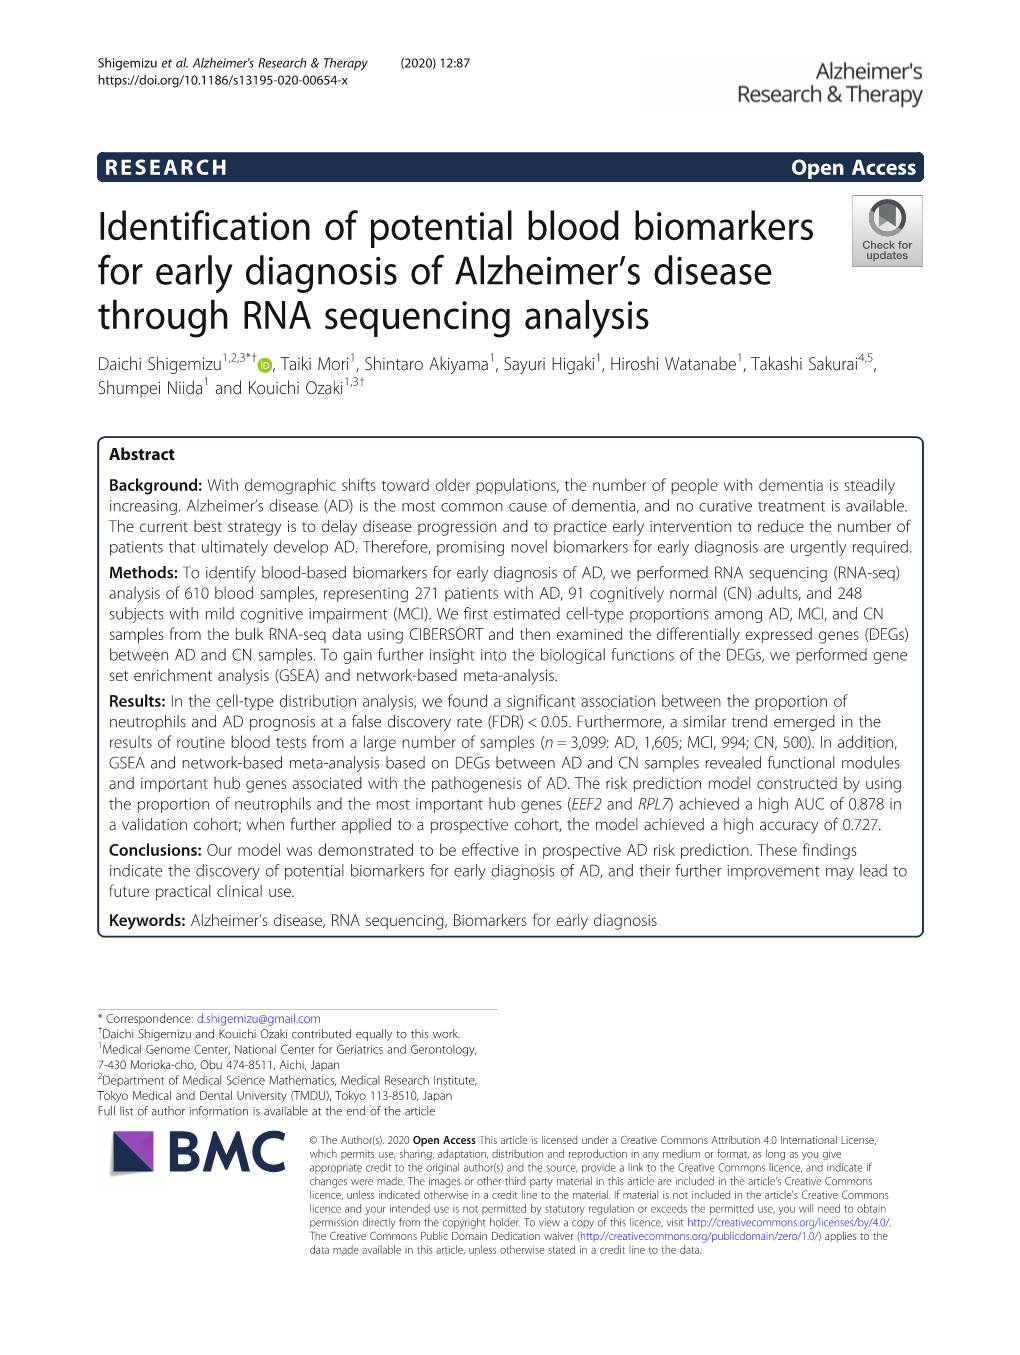 Identification of Potential Blood Biomarkers for Early Diagnosis Of